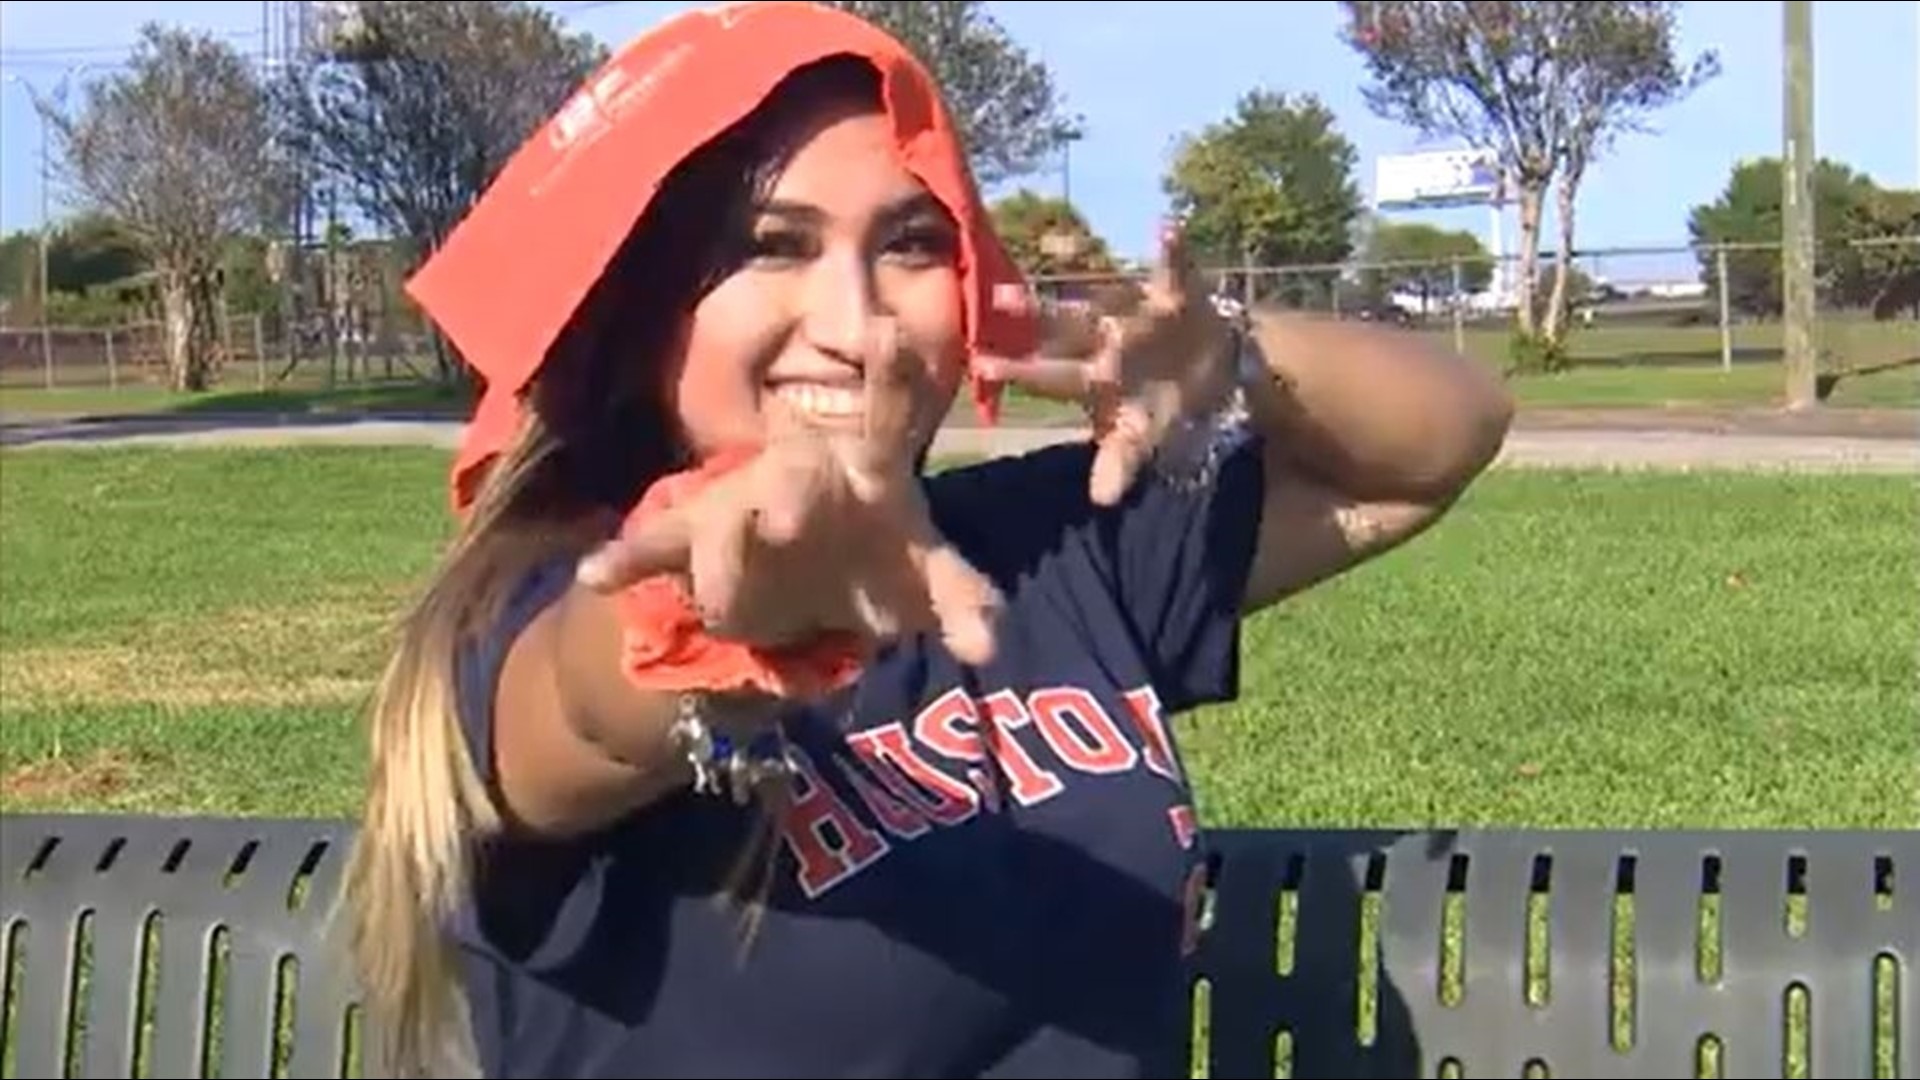 The Astros are one win away from the World Series run and some superstitious fans are pulling out all the stops to help them win, including the viral 'Voodoo fan.'